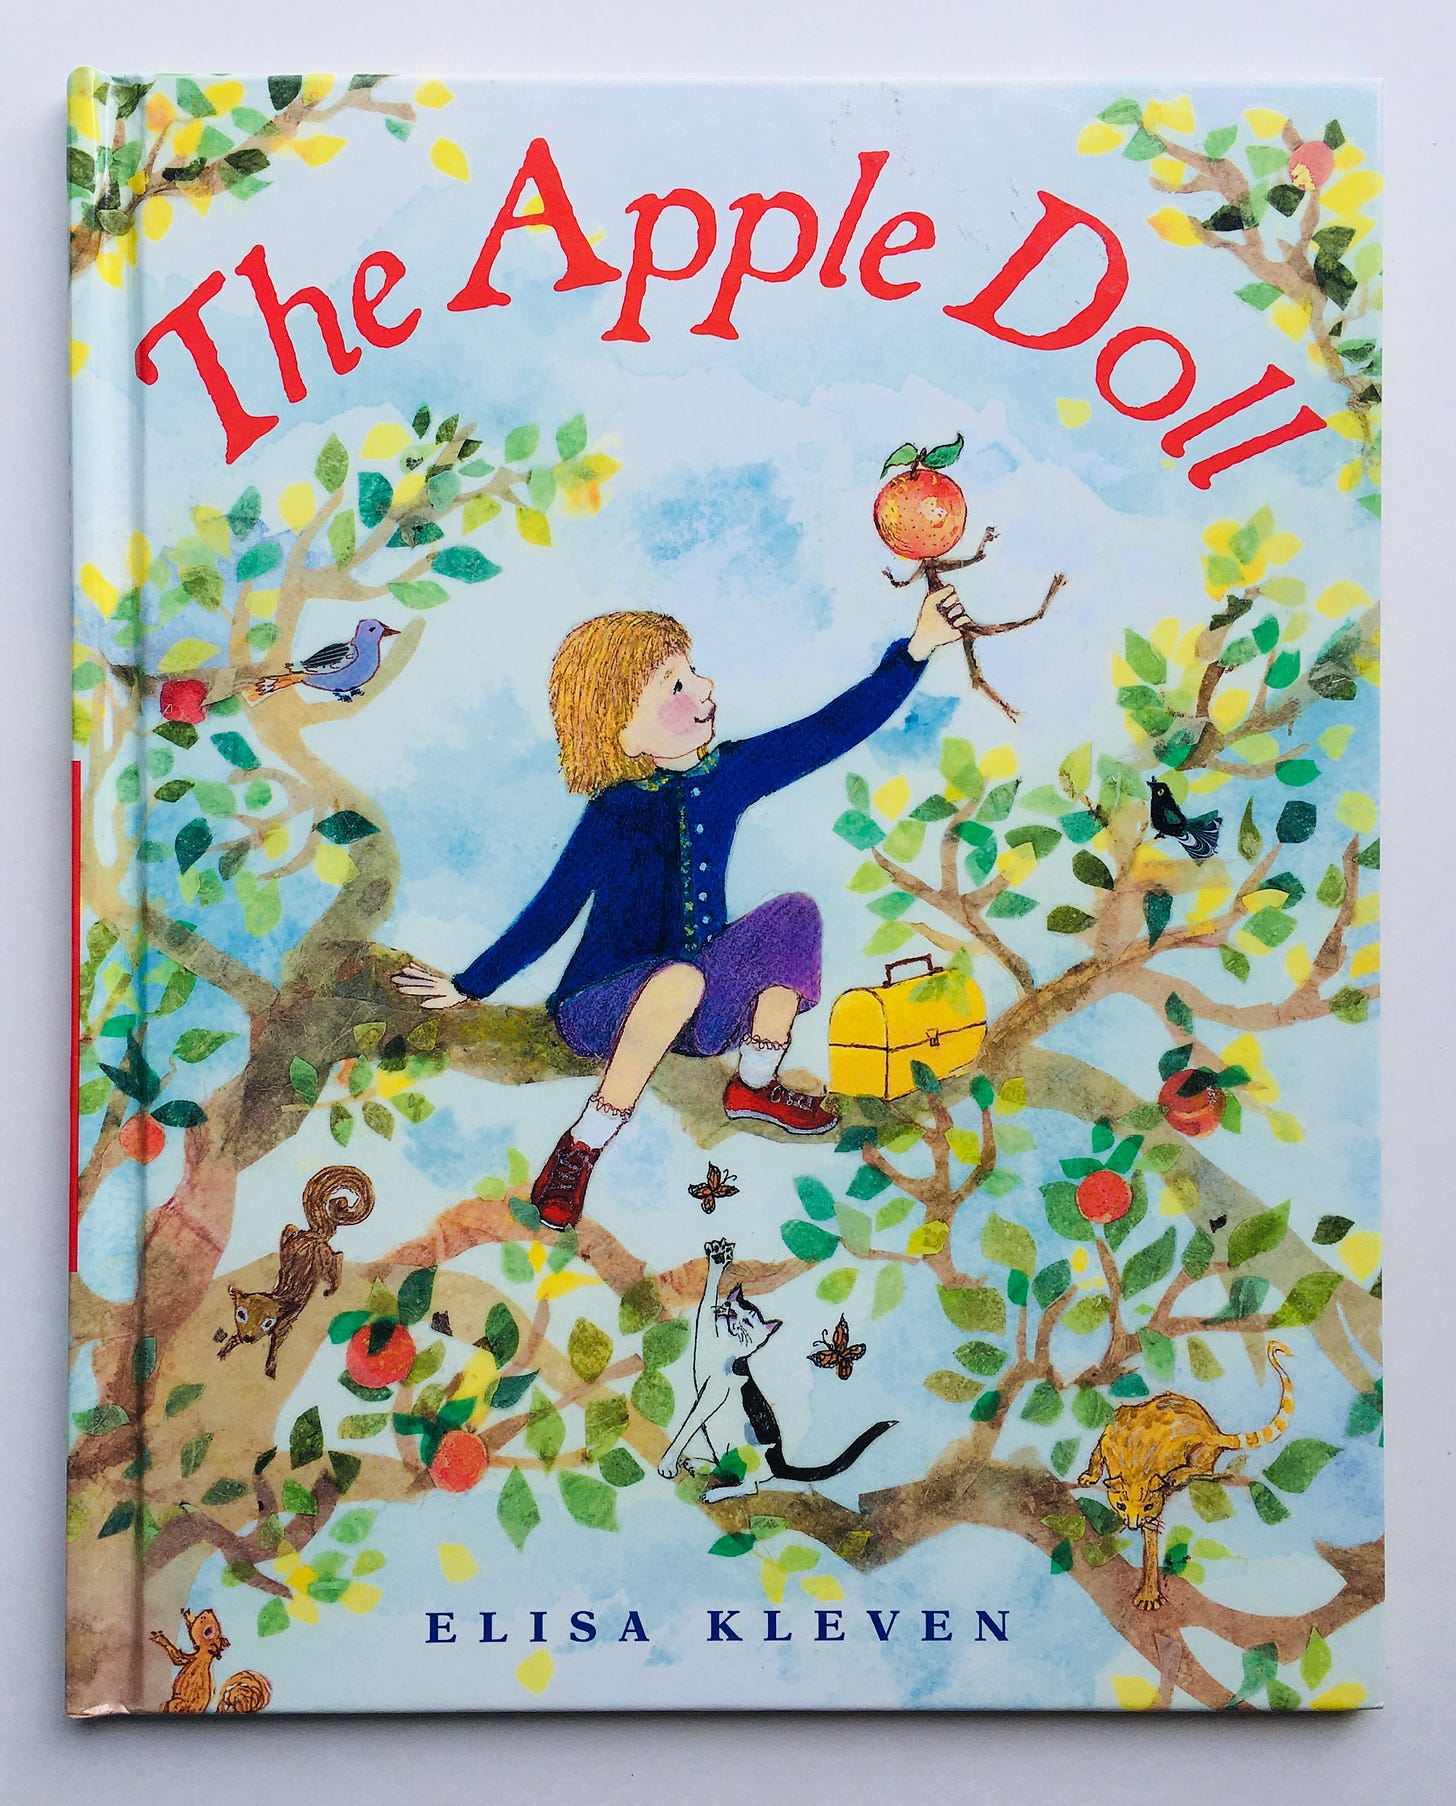 A girl sits on a branch of an apple tree, playing with an apple doll